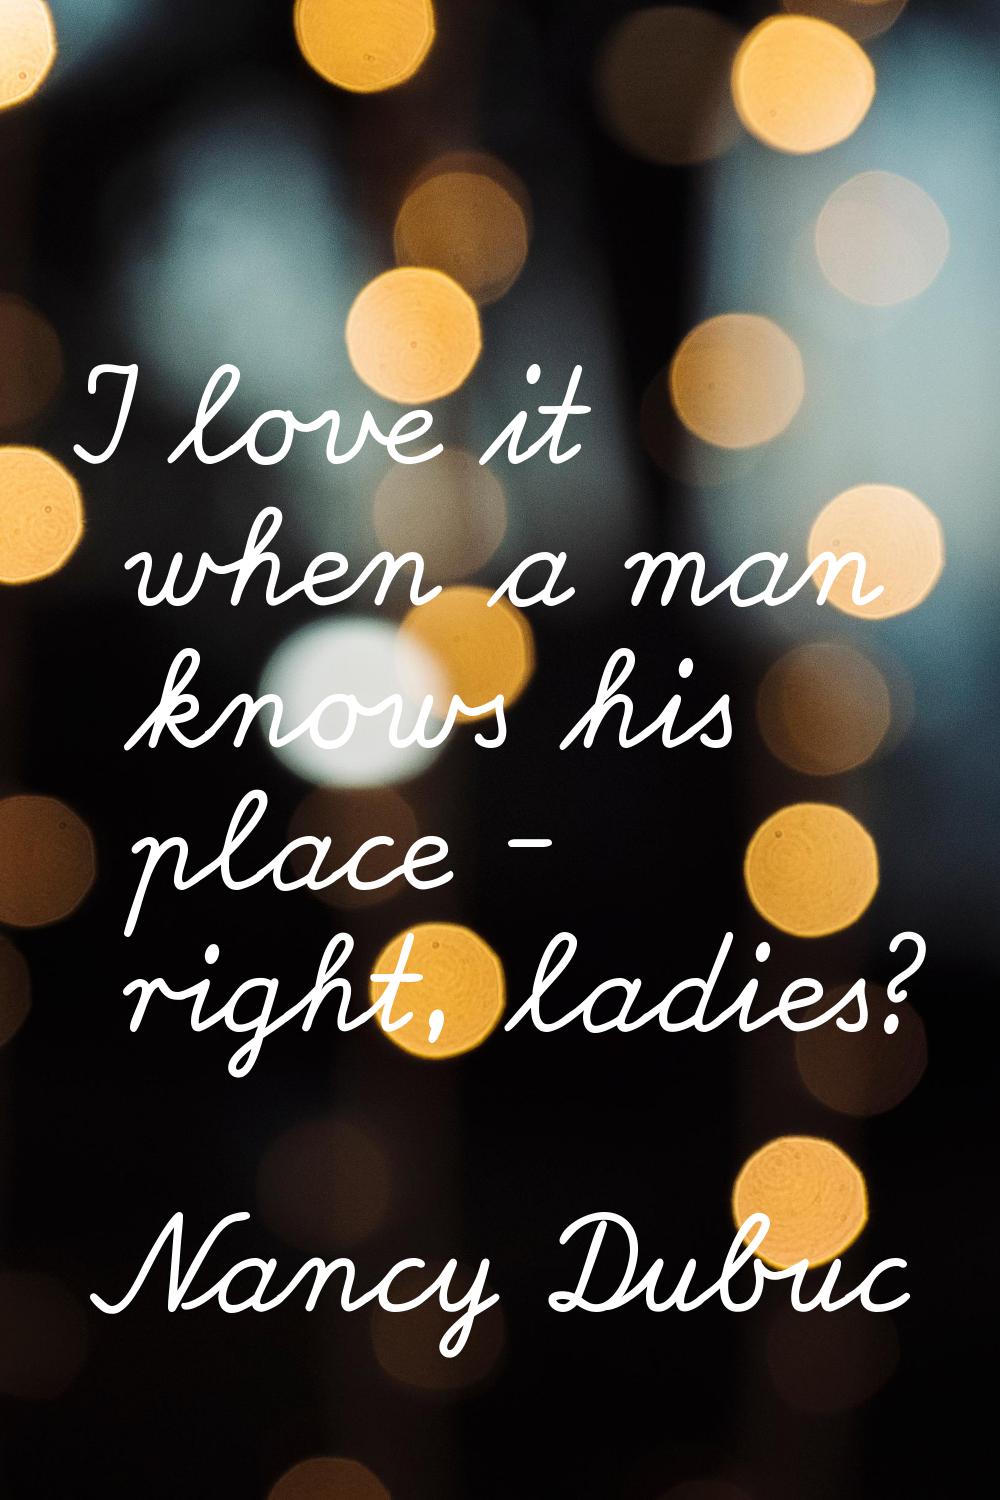 I love it when a man knows his place - right, ladies?